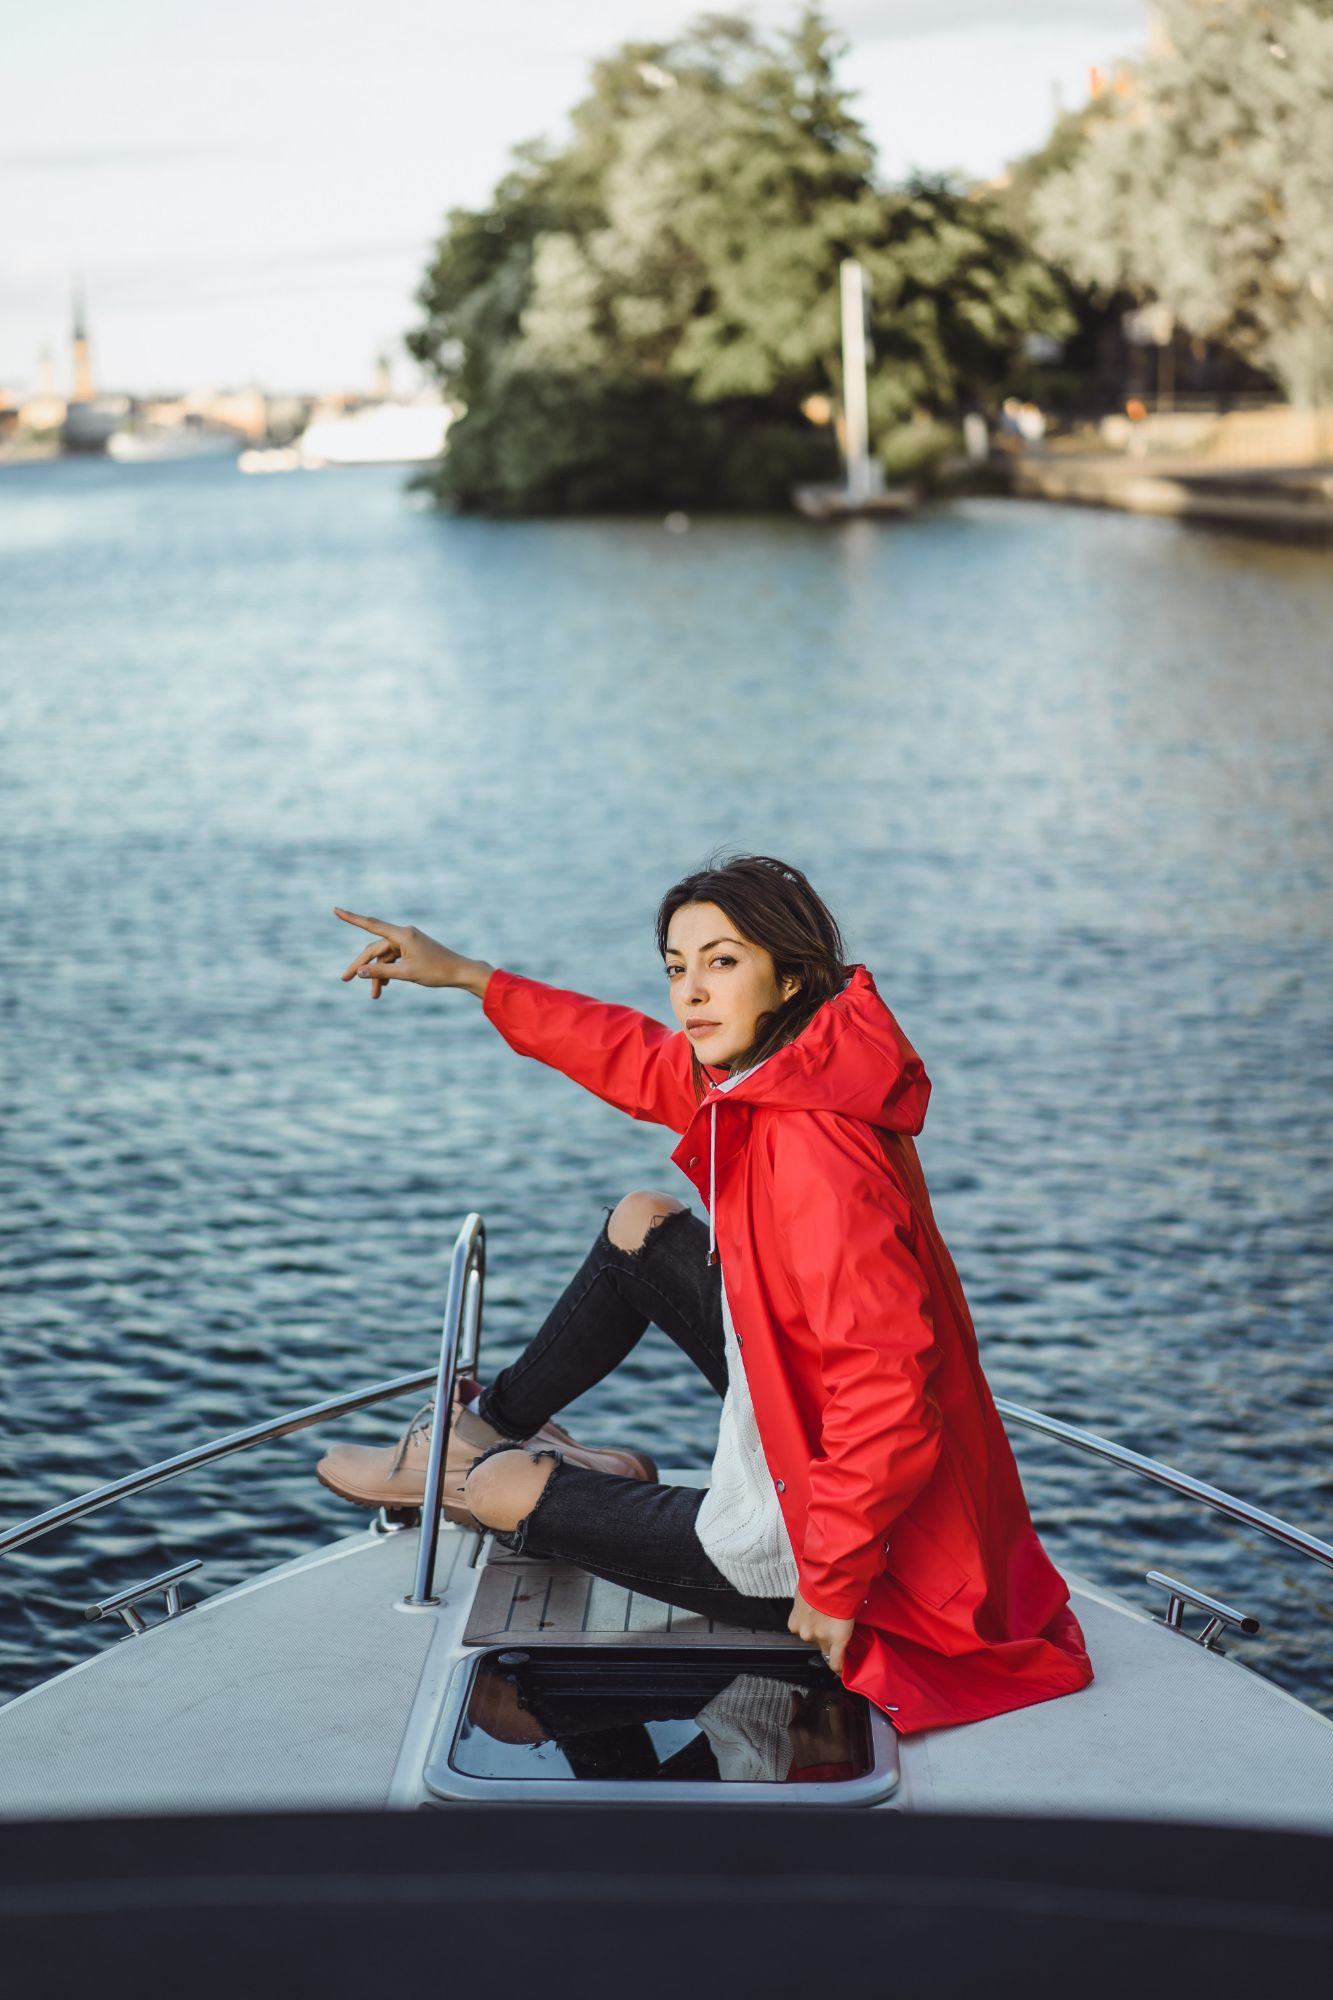 A woman pictured with her hand stretched overboard a boat | Source: Freepik